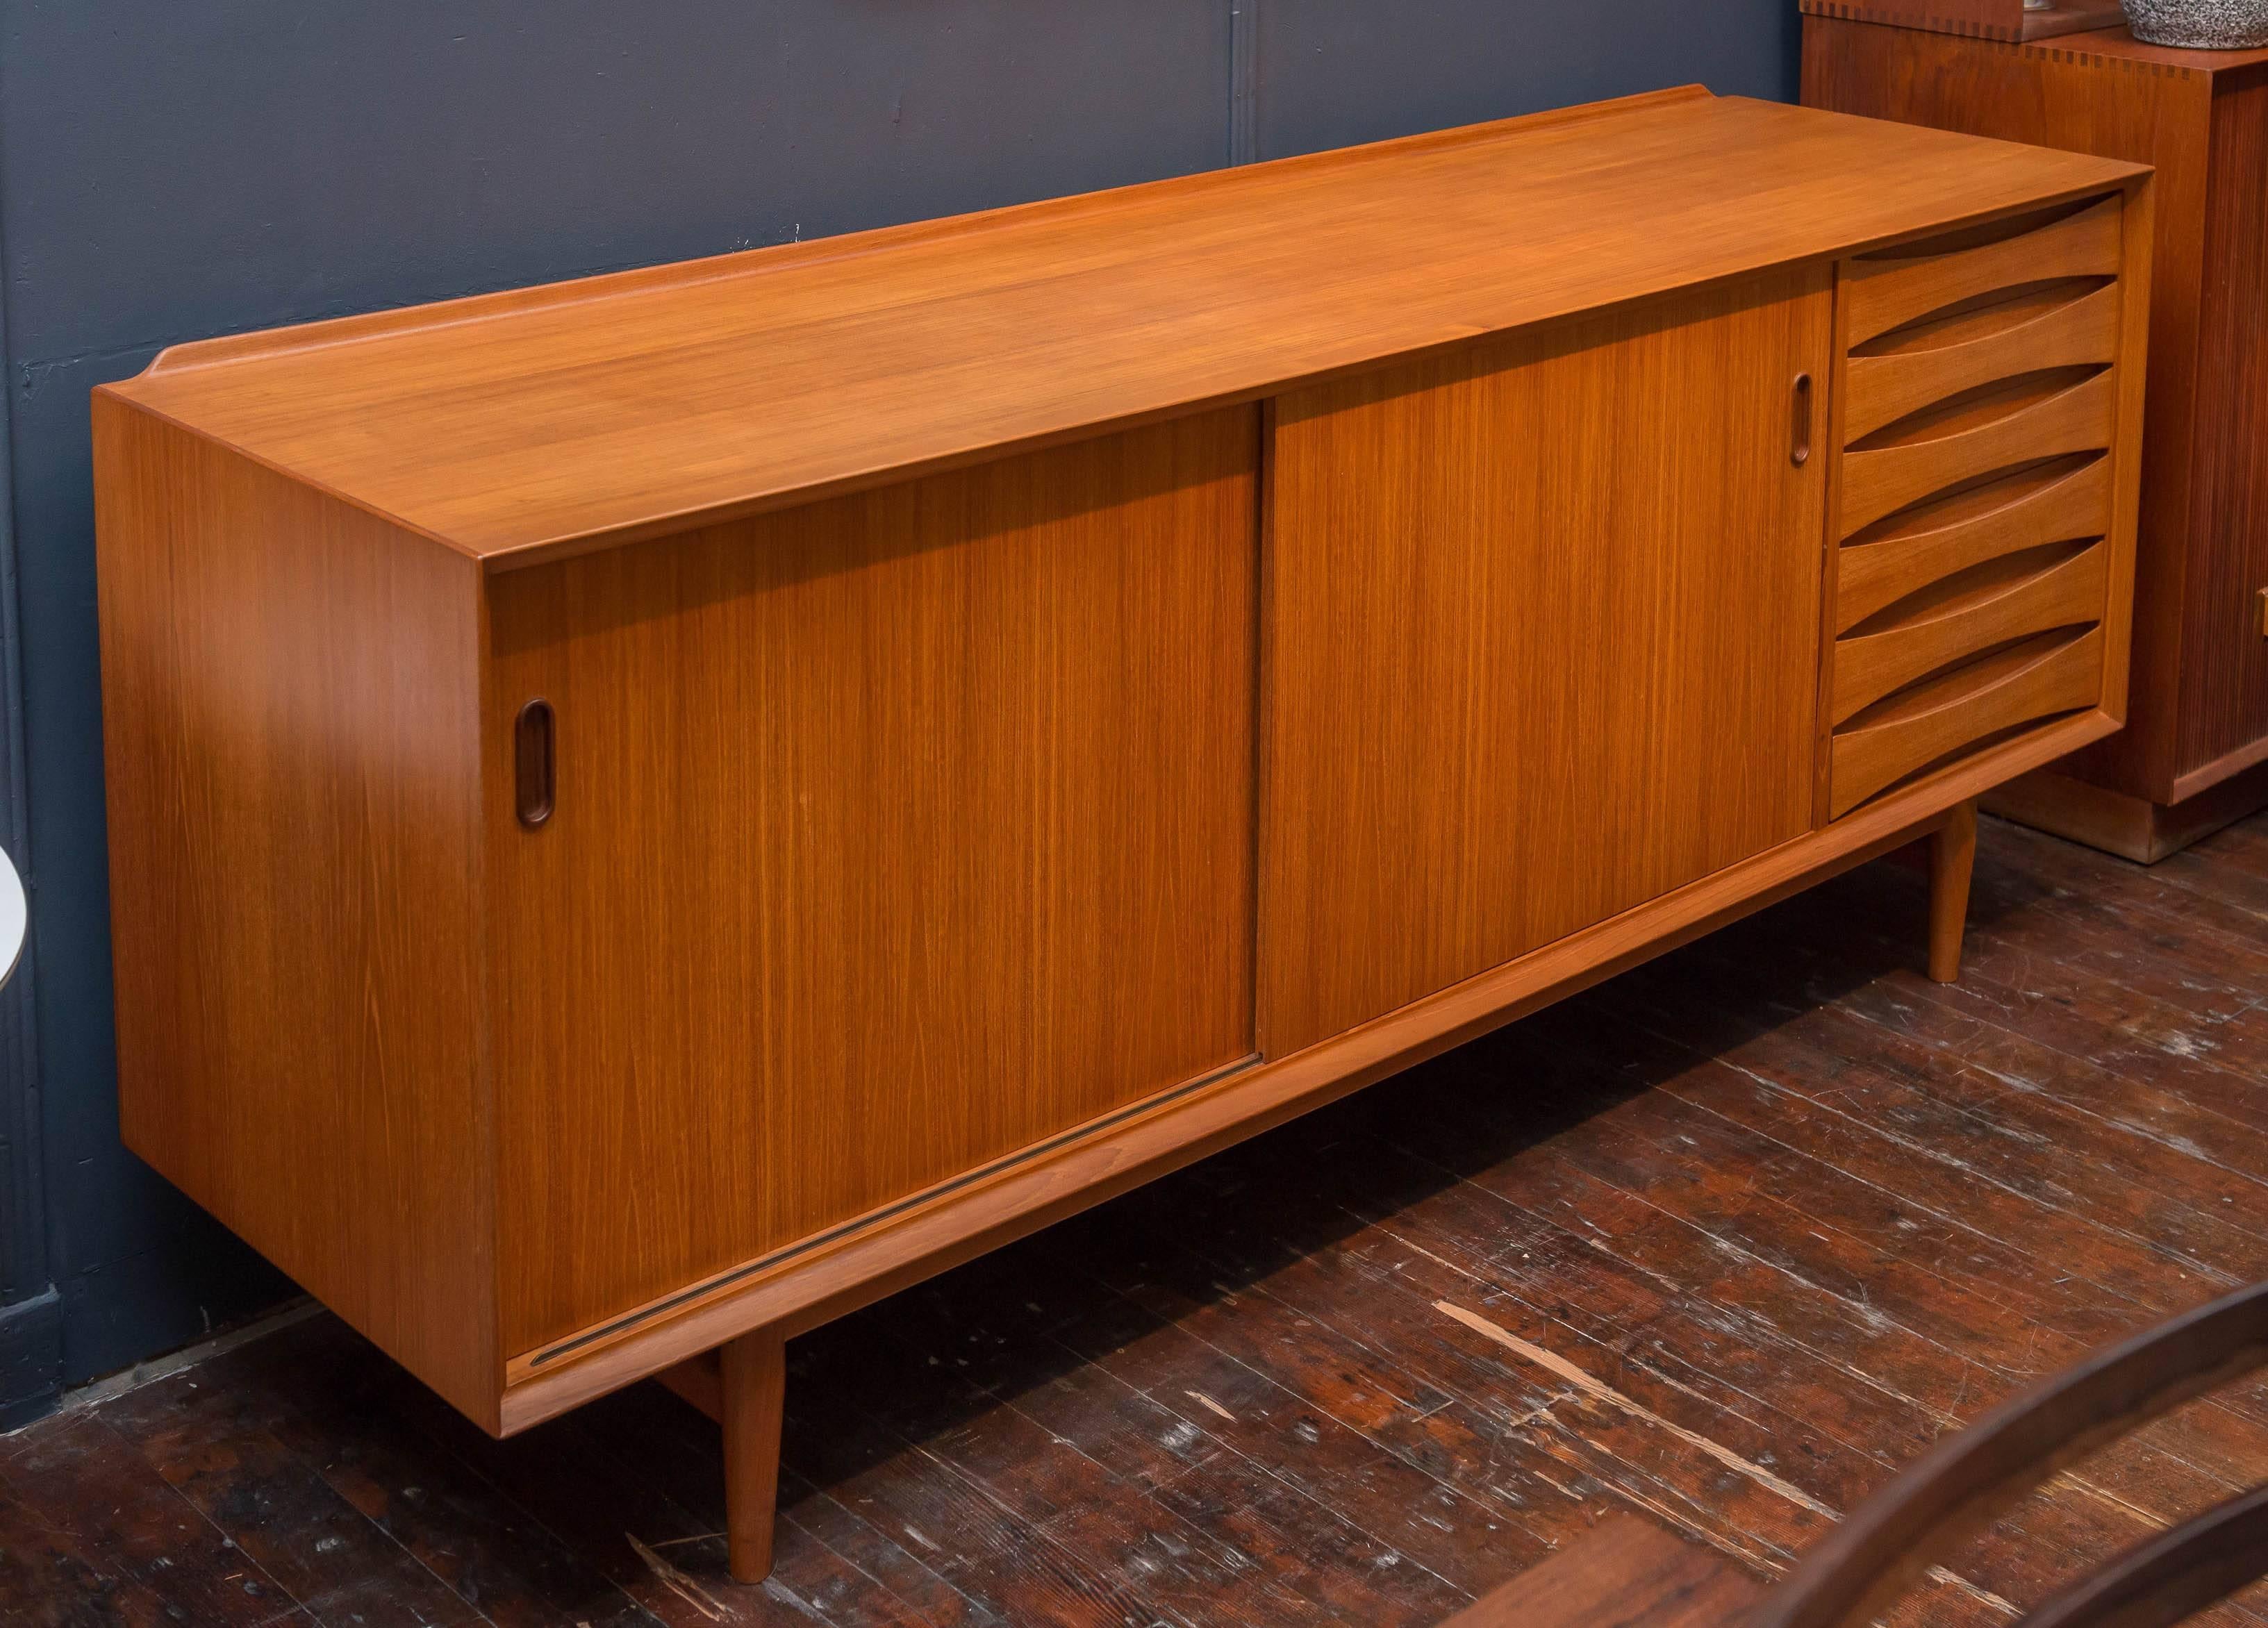 Arne Vodder design teak credenza for Sibast Furniture co, Denamrk. Acquired from the original family whom purchased it in Europe in the late 1950's. 
Three adjustable shelves and a sculpted trim across the top back, ready to enjoy.